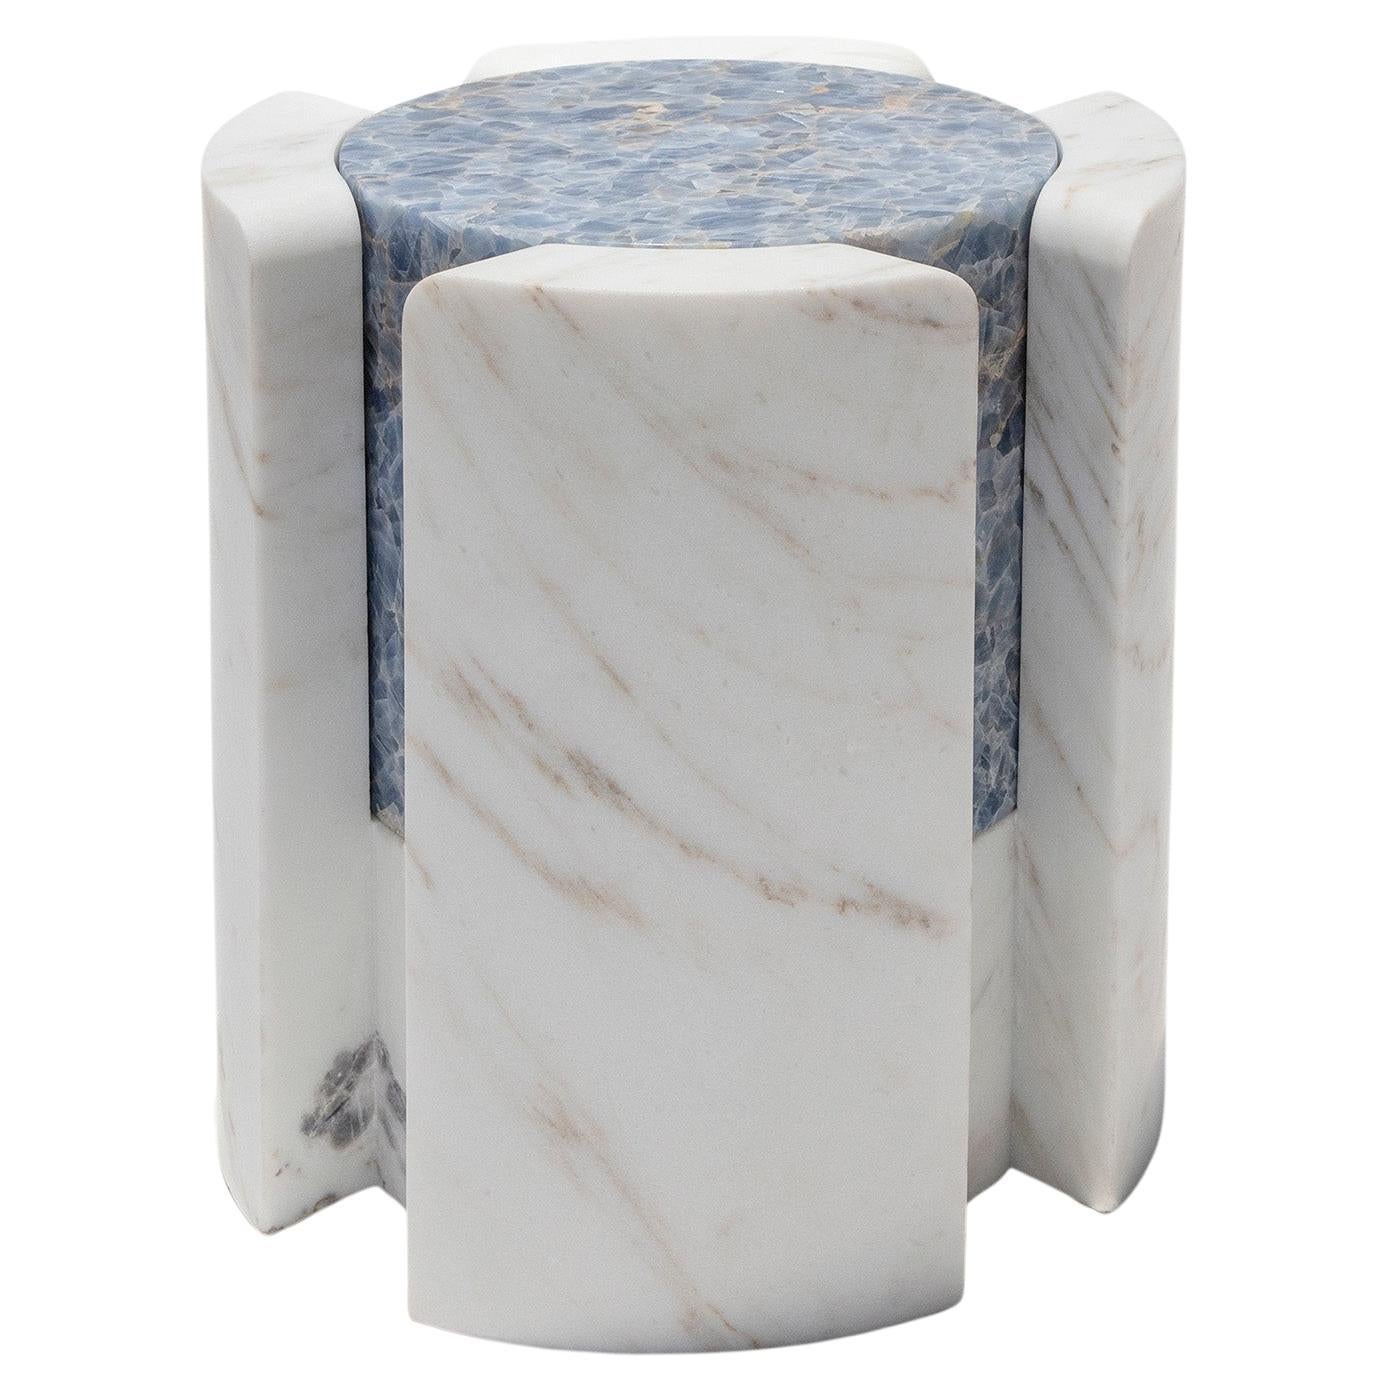 Volcanic Shade of Marble III Stool/Table by Sten Studio, REP by Tuleste Factory